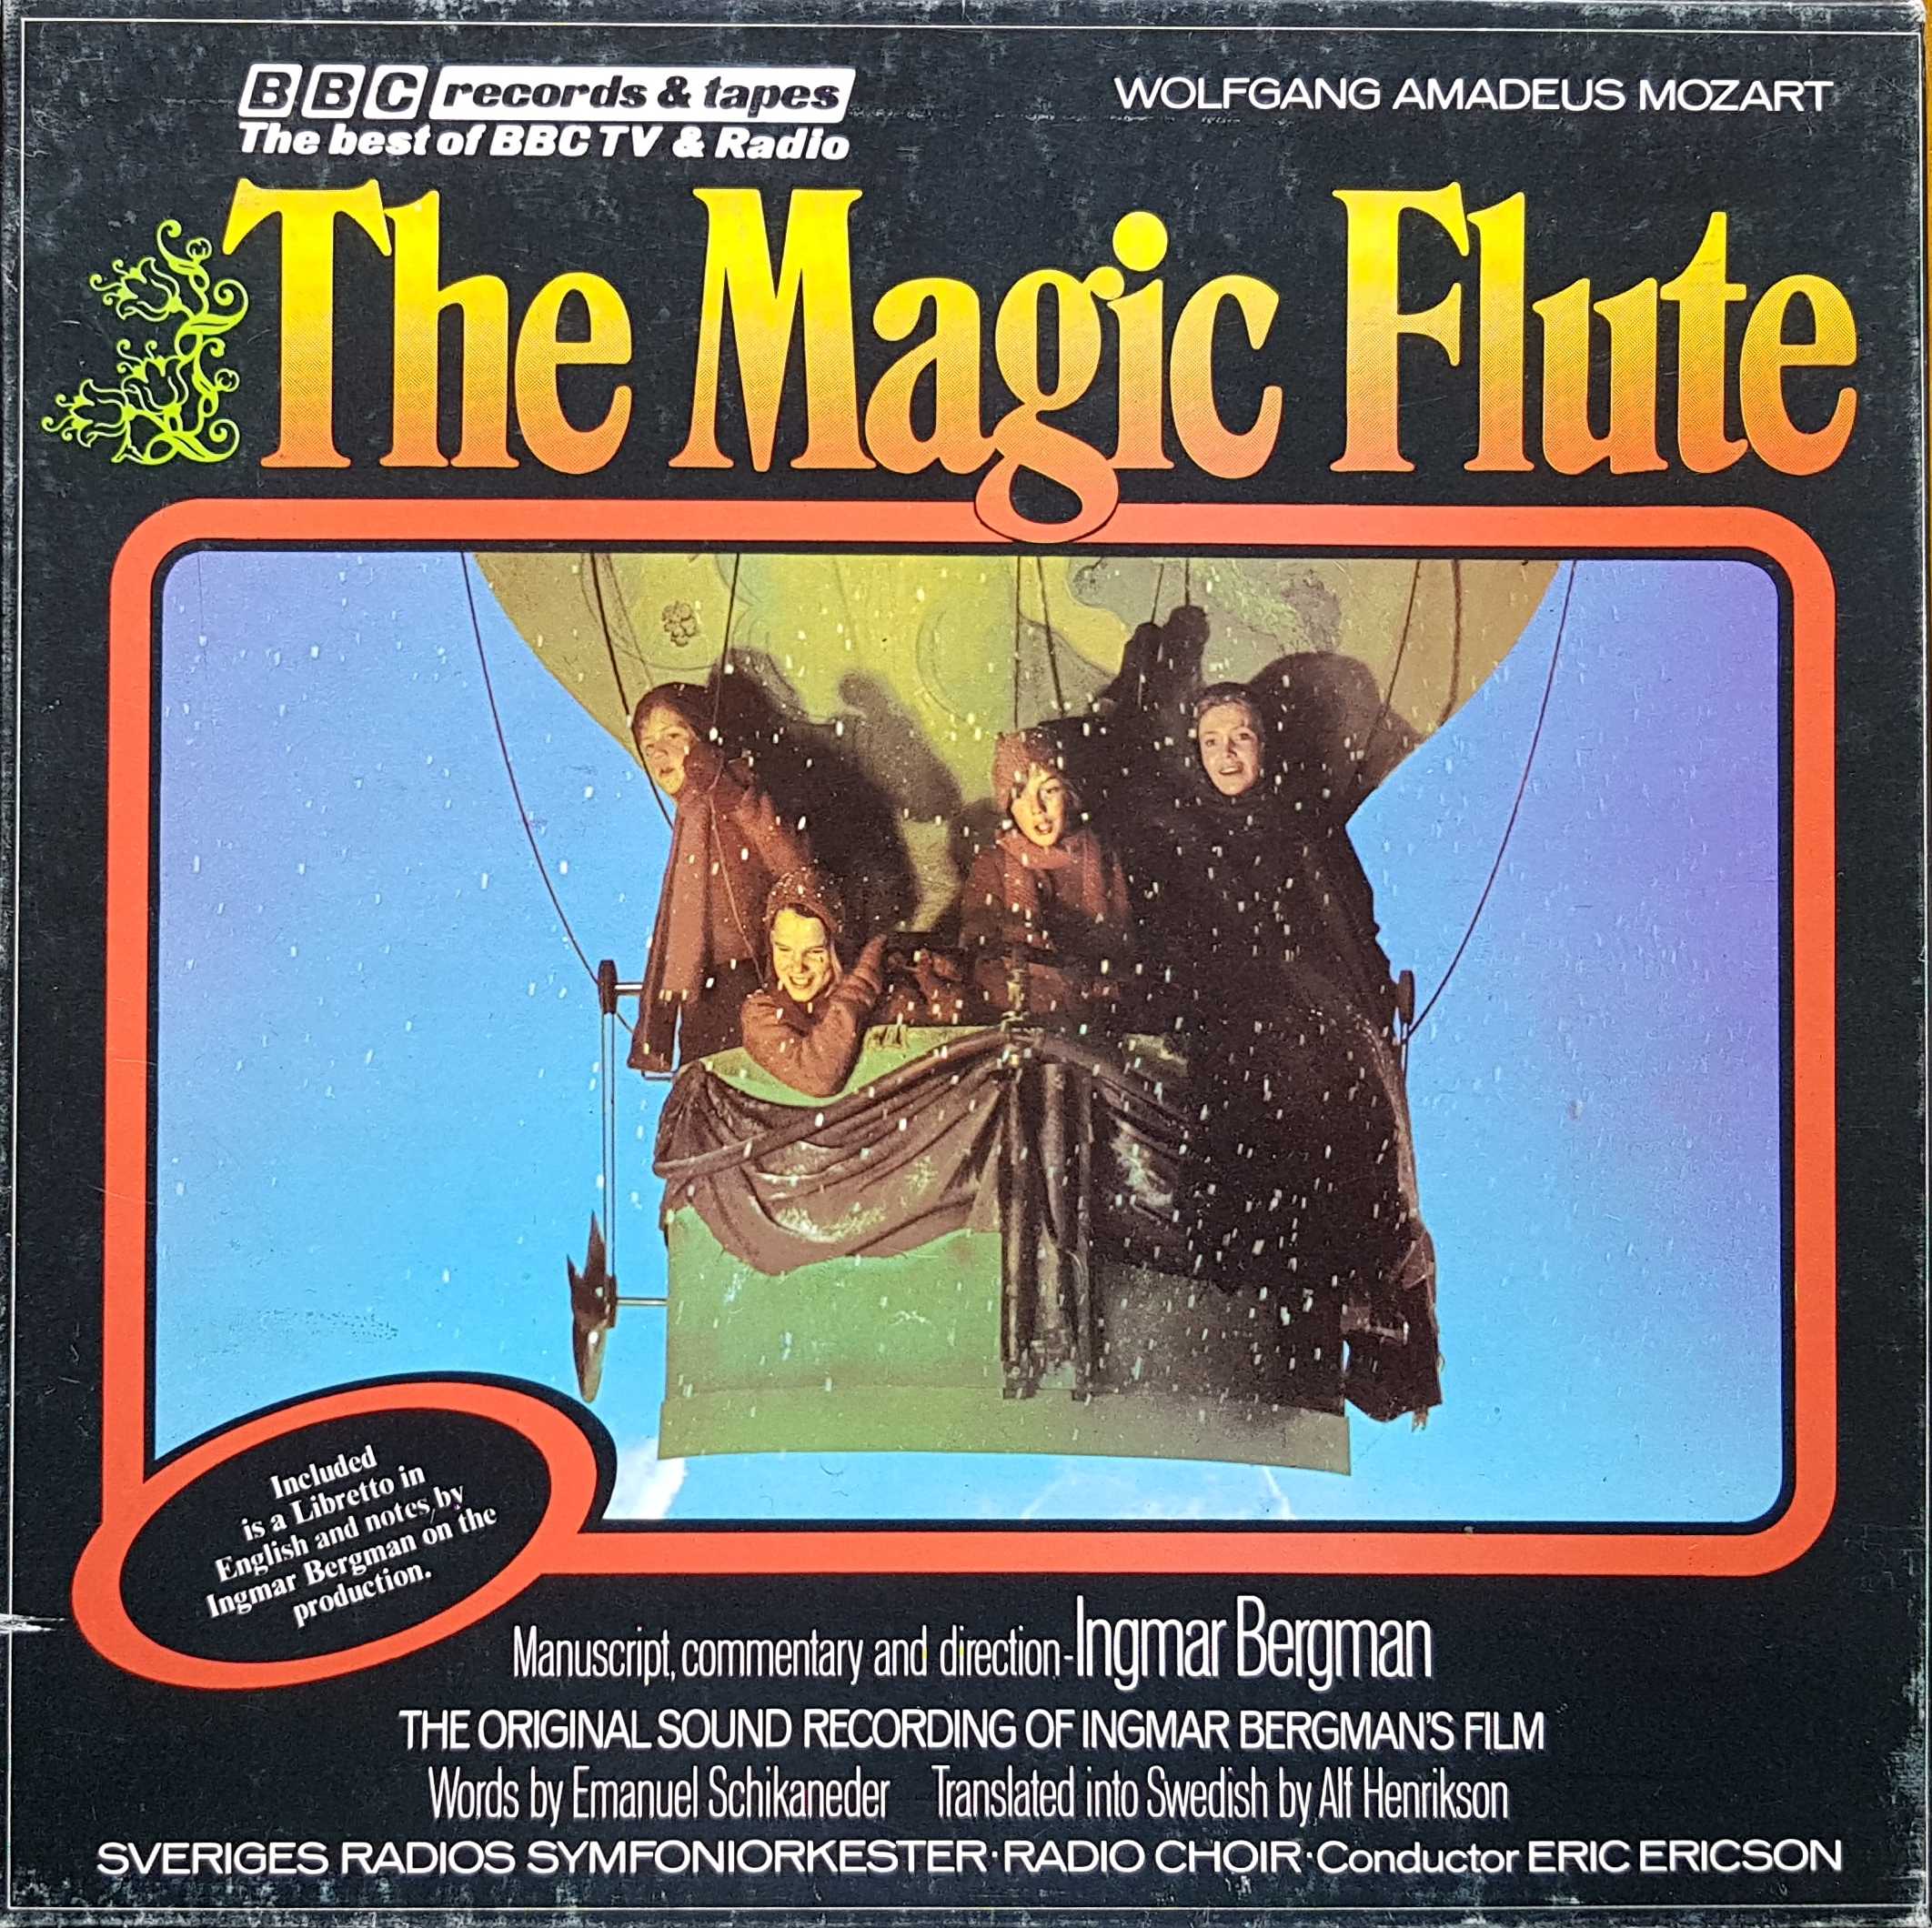 Picture of REK 223 The magic flute by artist Wolfgang Amadeus Mozart / Sveriges Radios Symfoniorkester, Radiokren from the BBC albums - Records and Tapes library